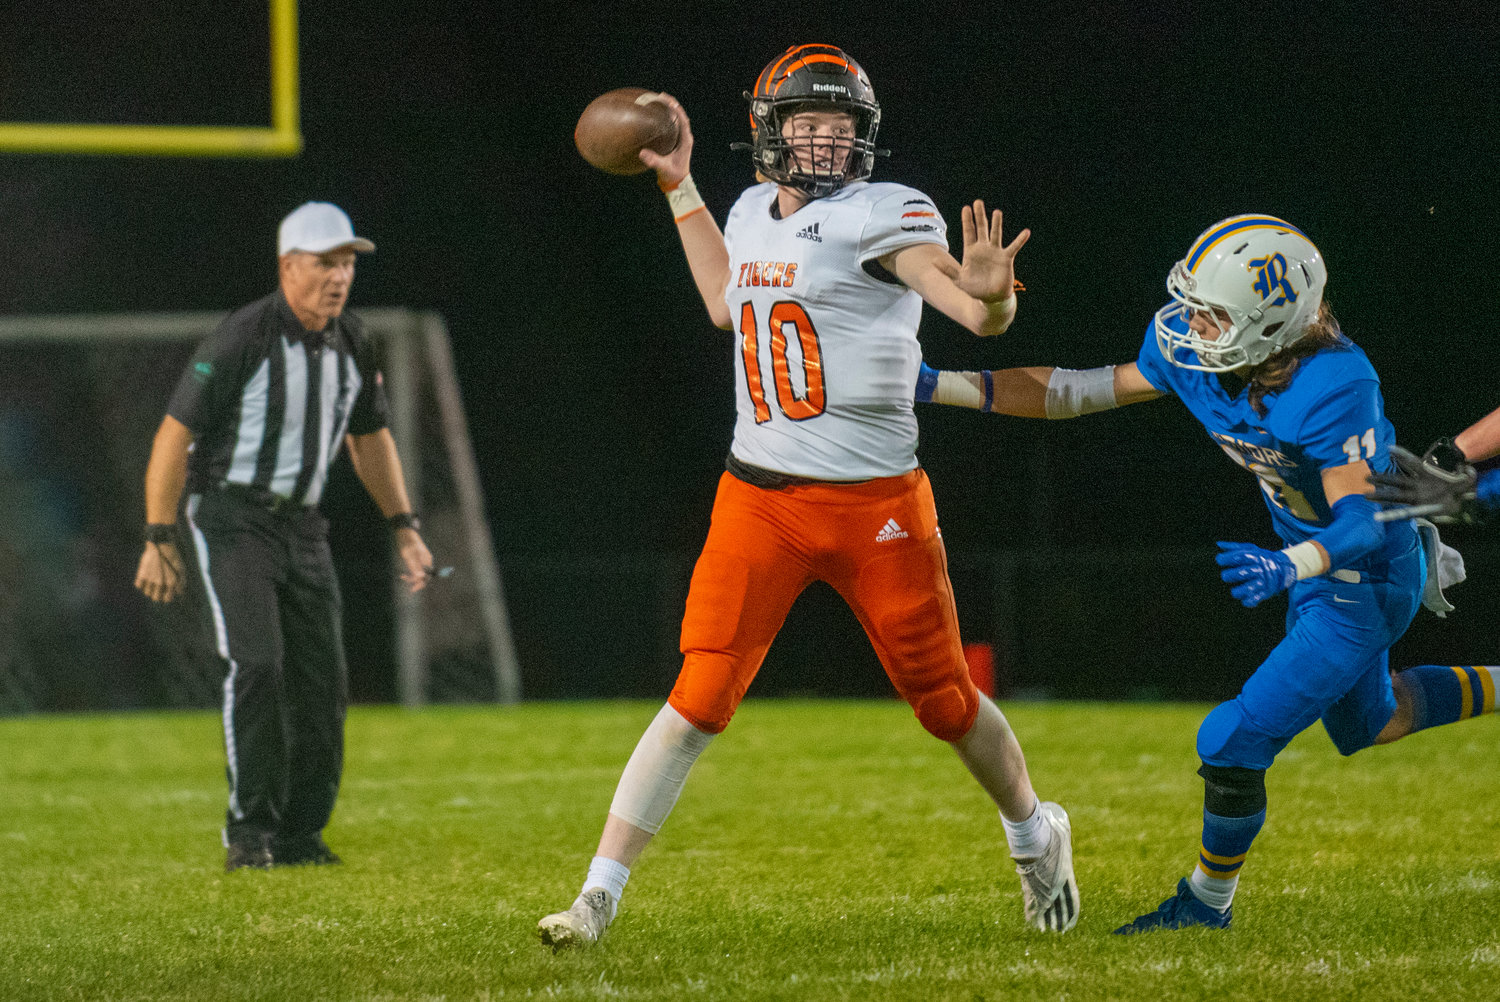 Centralia quarterback Landon Jenkins (10) gets a pass off under pressure from Rochester on Oct. 2, 2021.